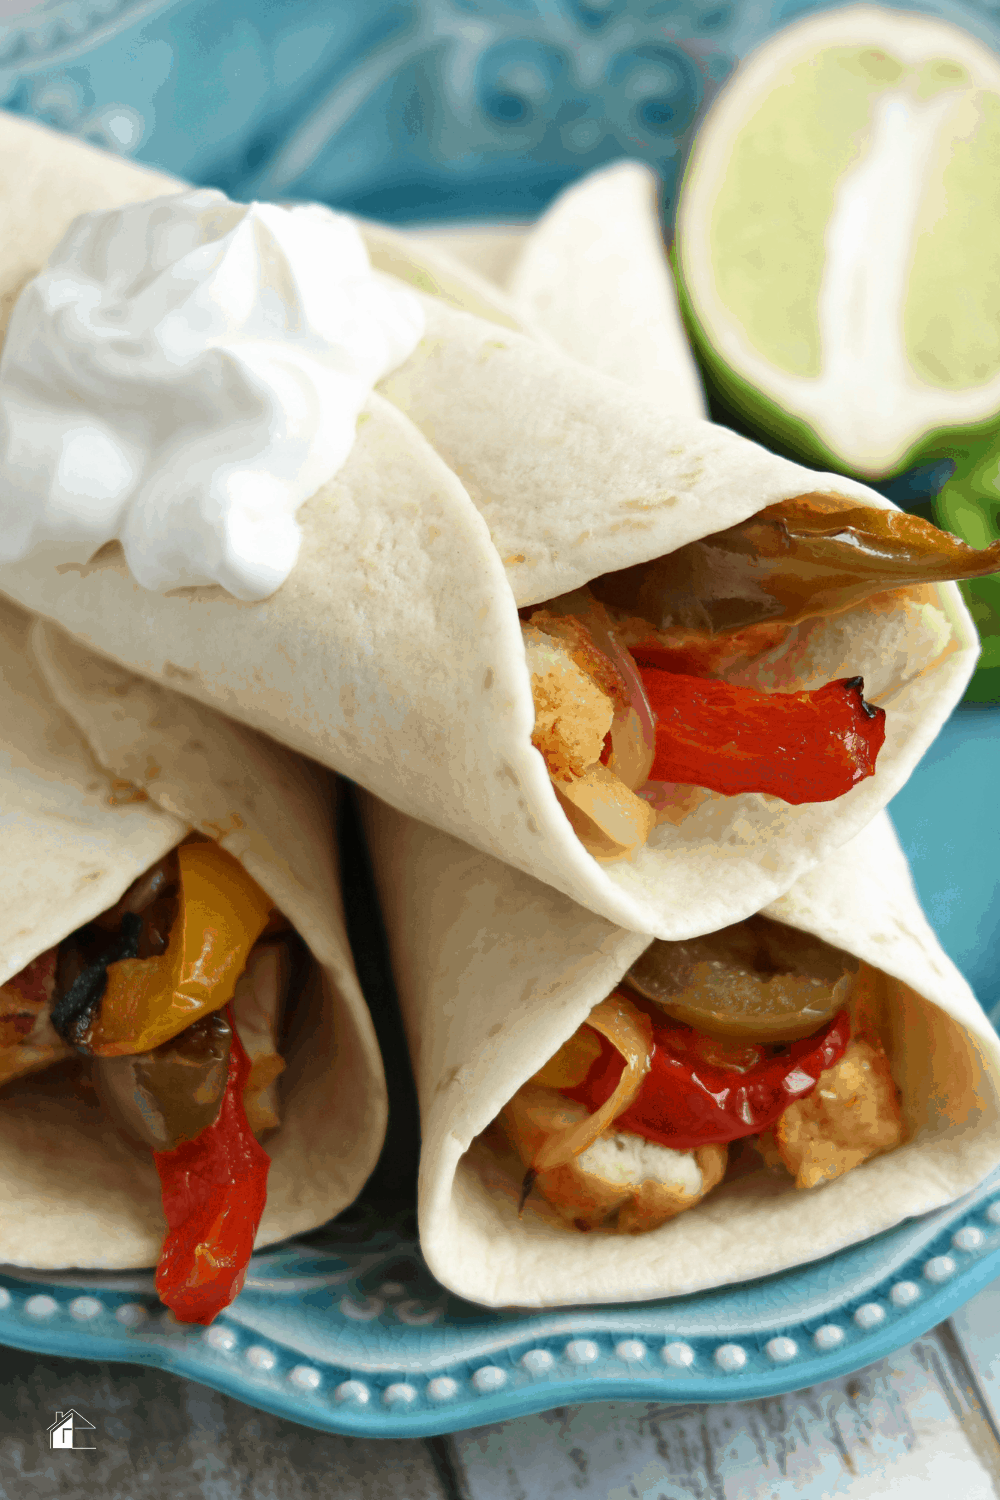 Try this sous vide tequila lime chicken fajita recipe. Cooking is like working magic, especially when you have the ability to use techniques once reserved for the pros. via @mystayathome